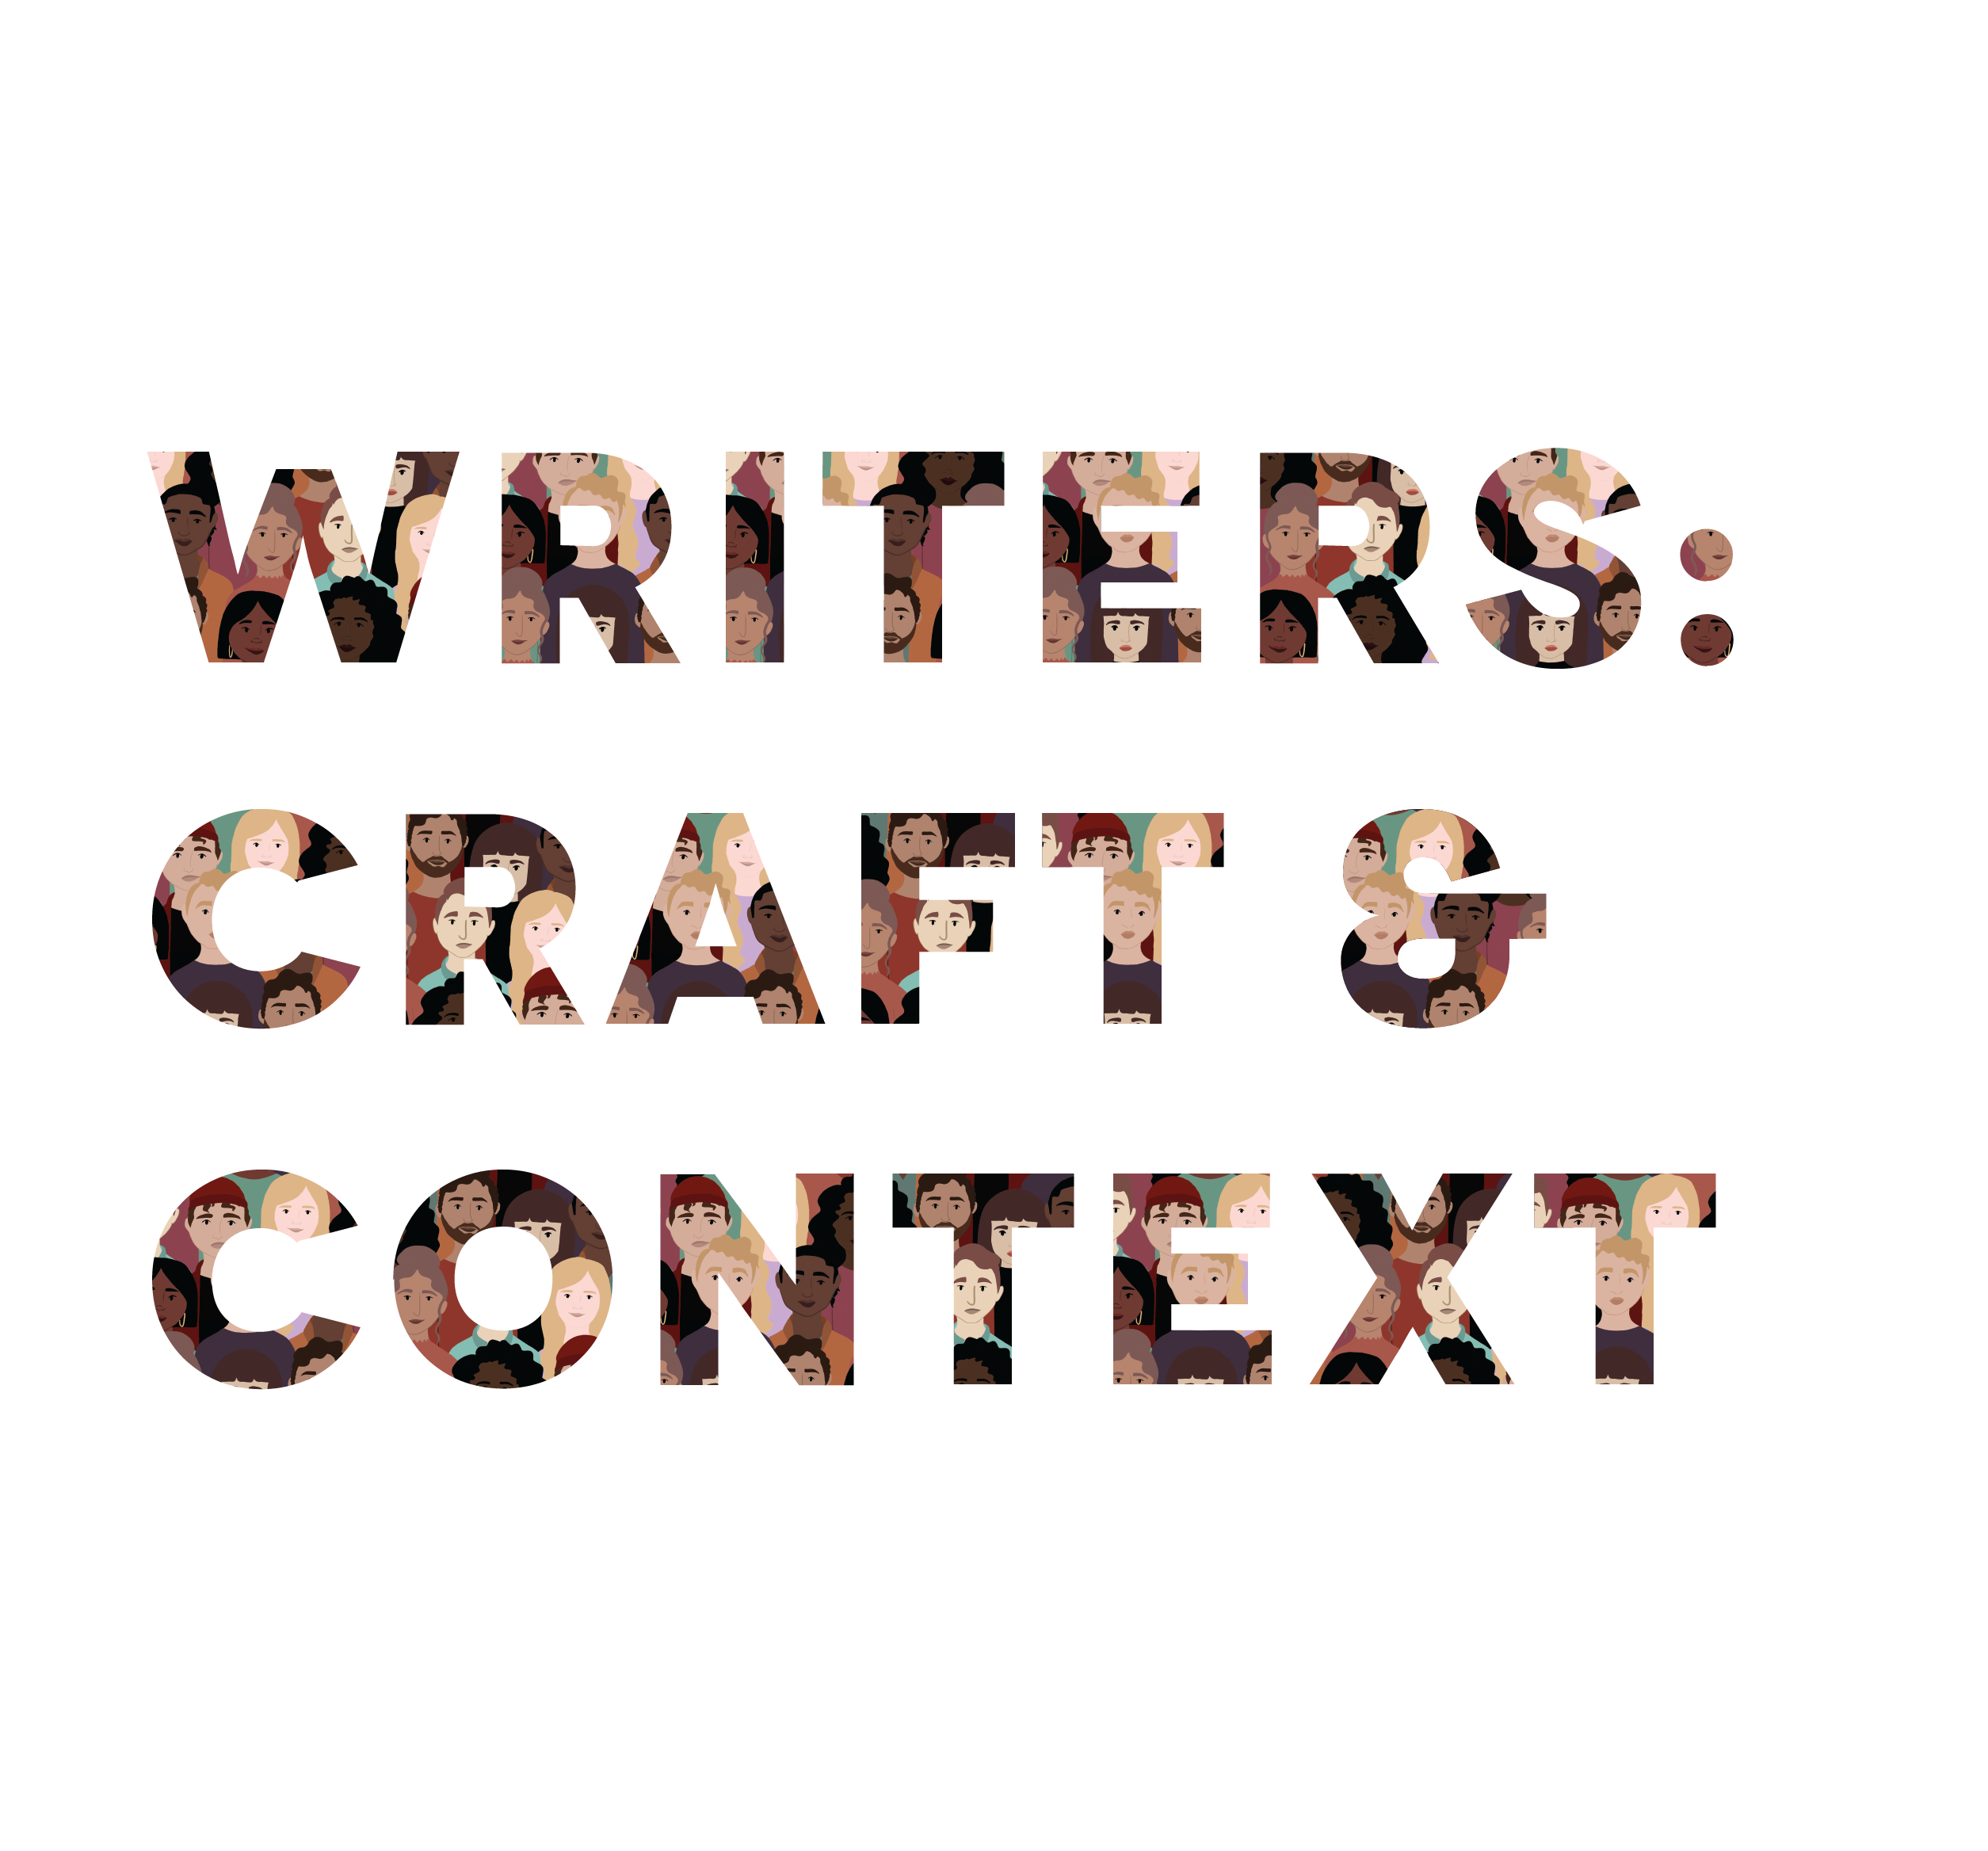 Logo for the journal named "Writers: Craft & Context." The letters of the words are comprised of very small montages of people's faces.